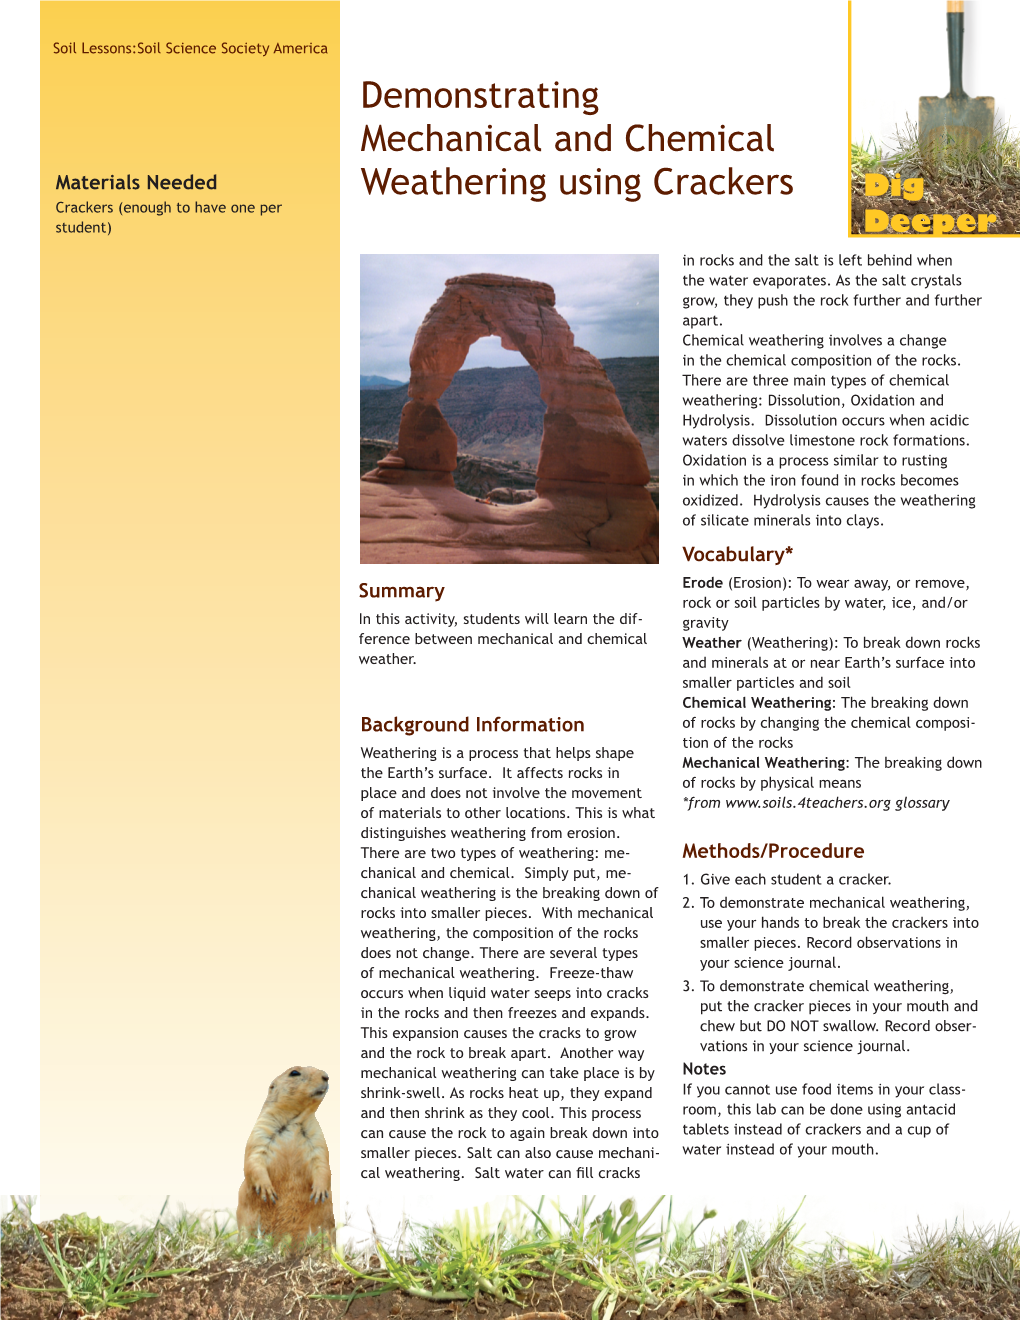 Demonstrating Mechanical and Chemical Weathering Using Crackers